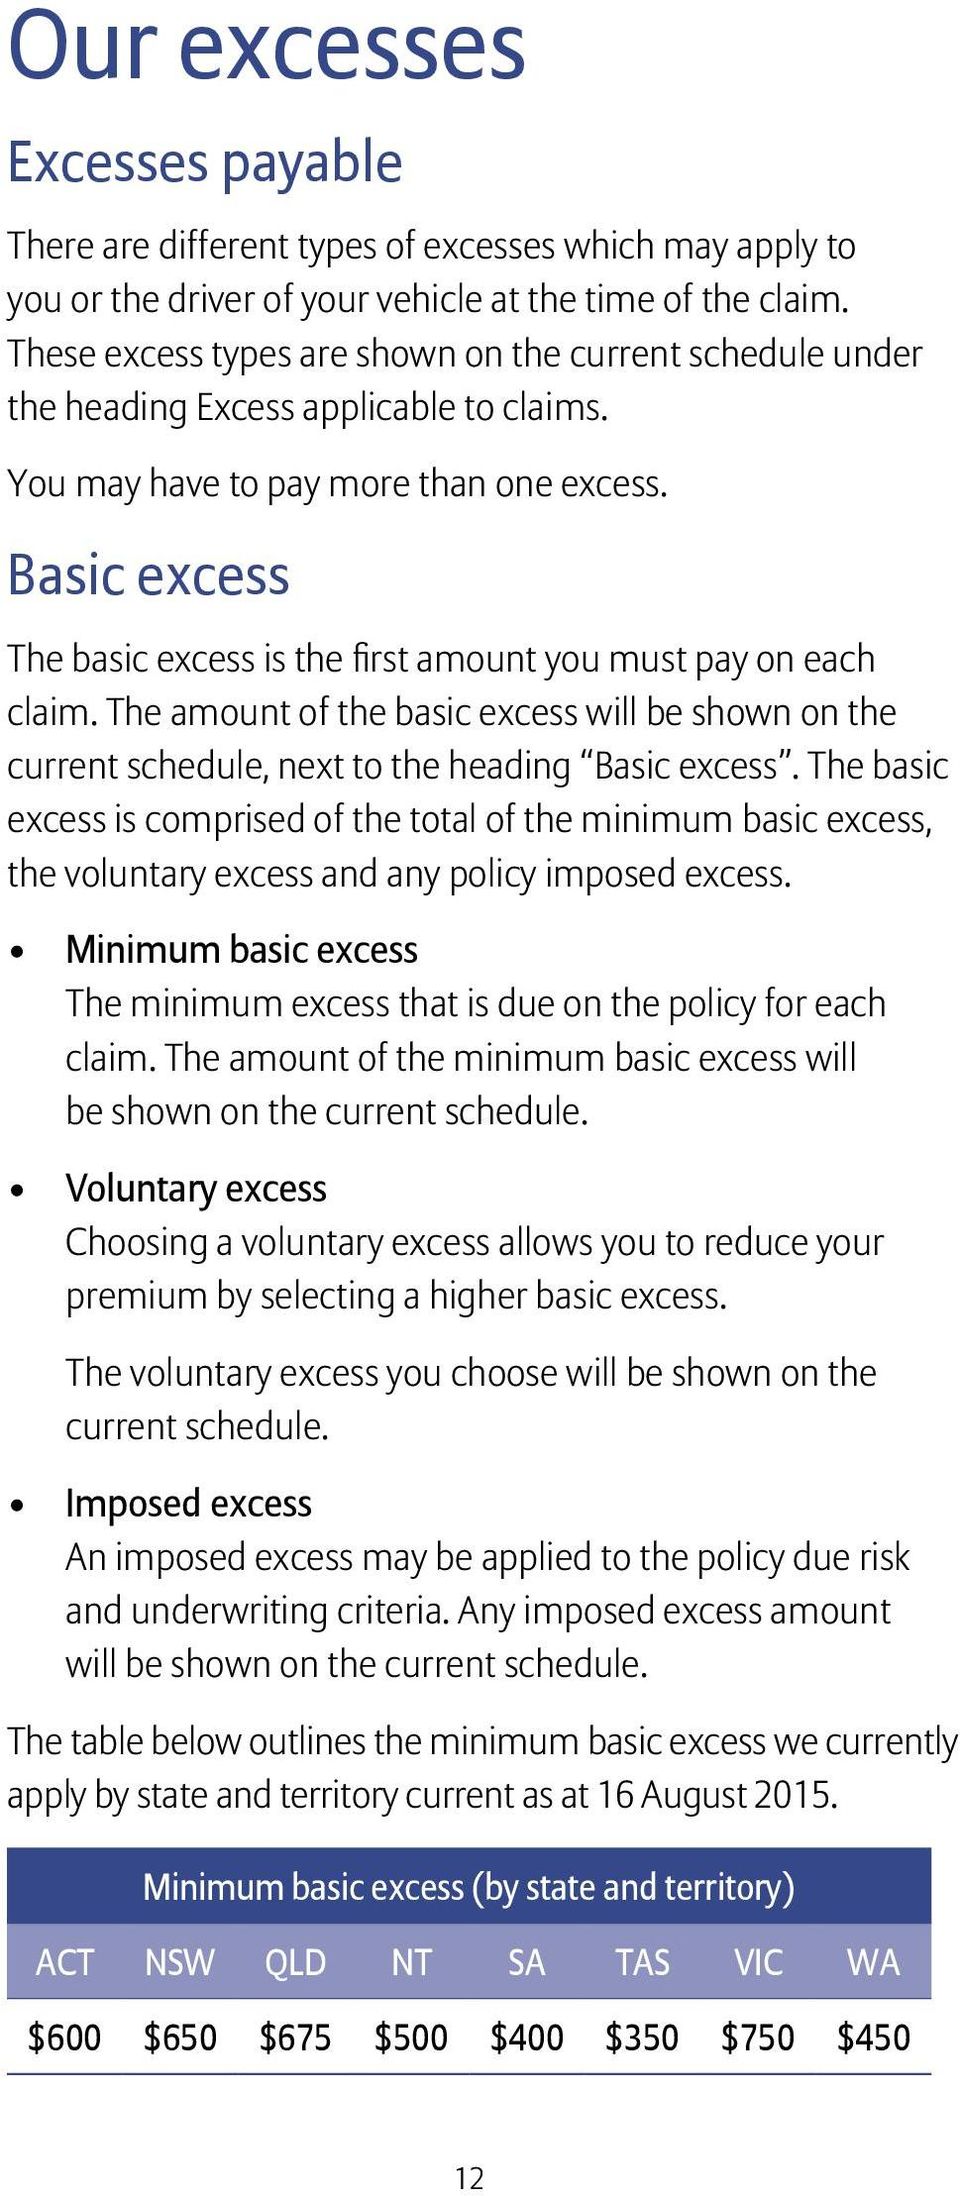 Basic excess The basic excess is the first amount you must pay on each claim. The amount of the basic excess will be shown on the current schedule, next to the heading Basic excess.